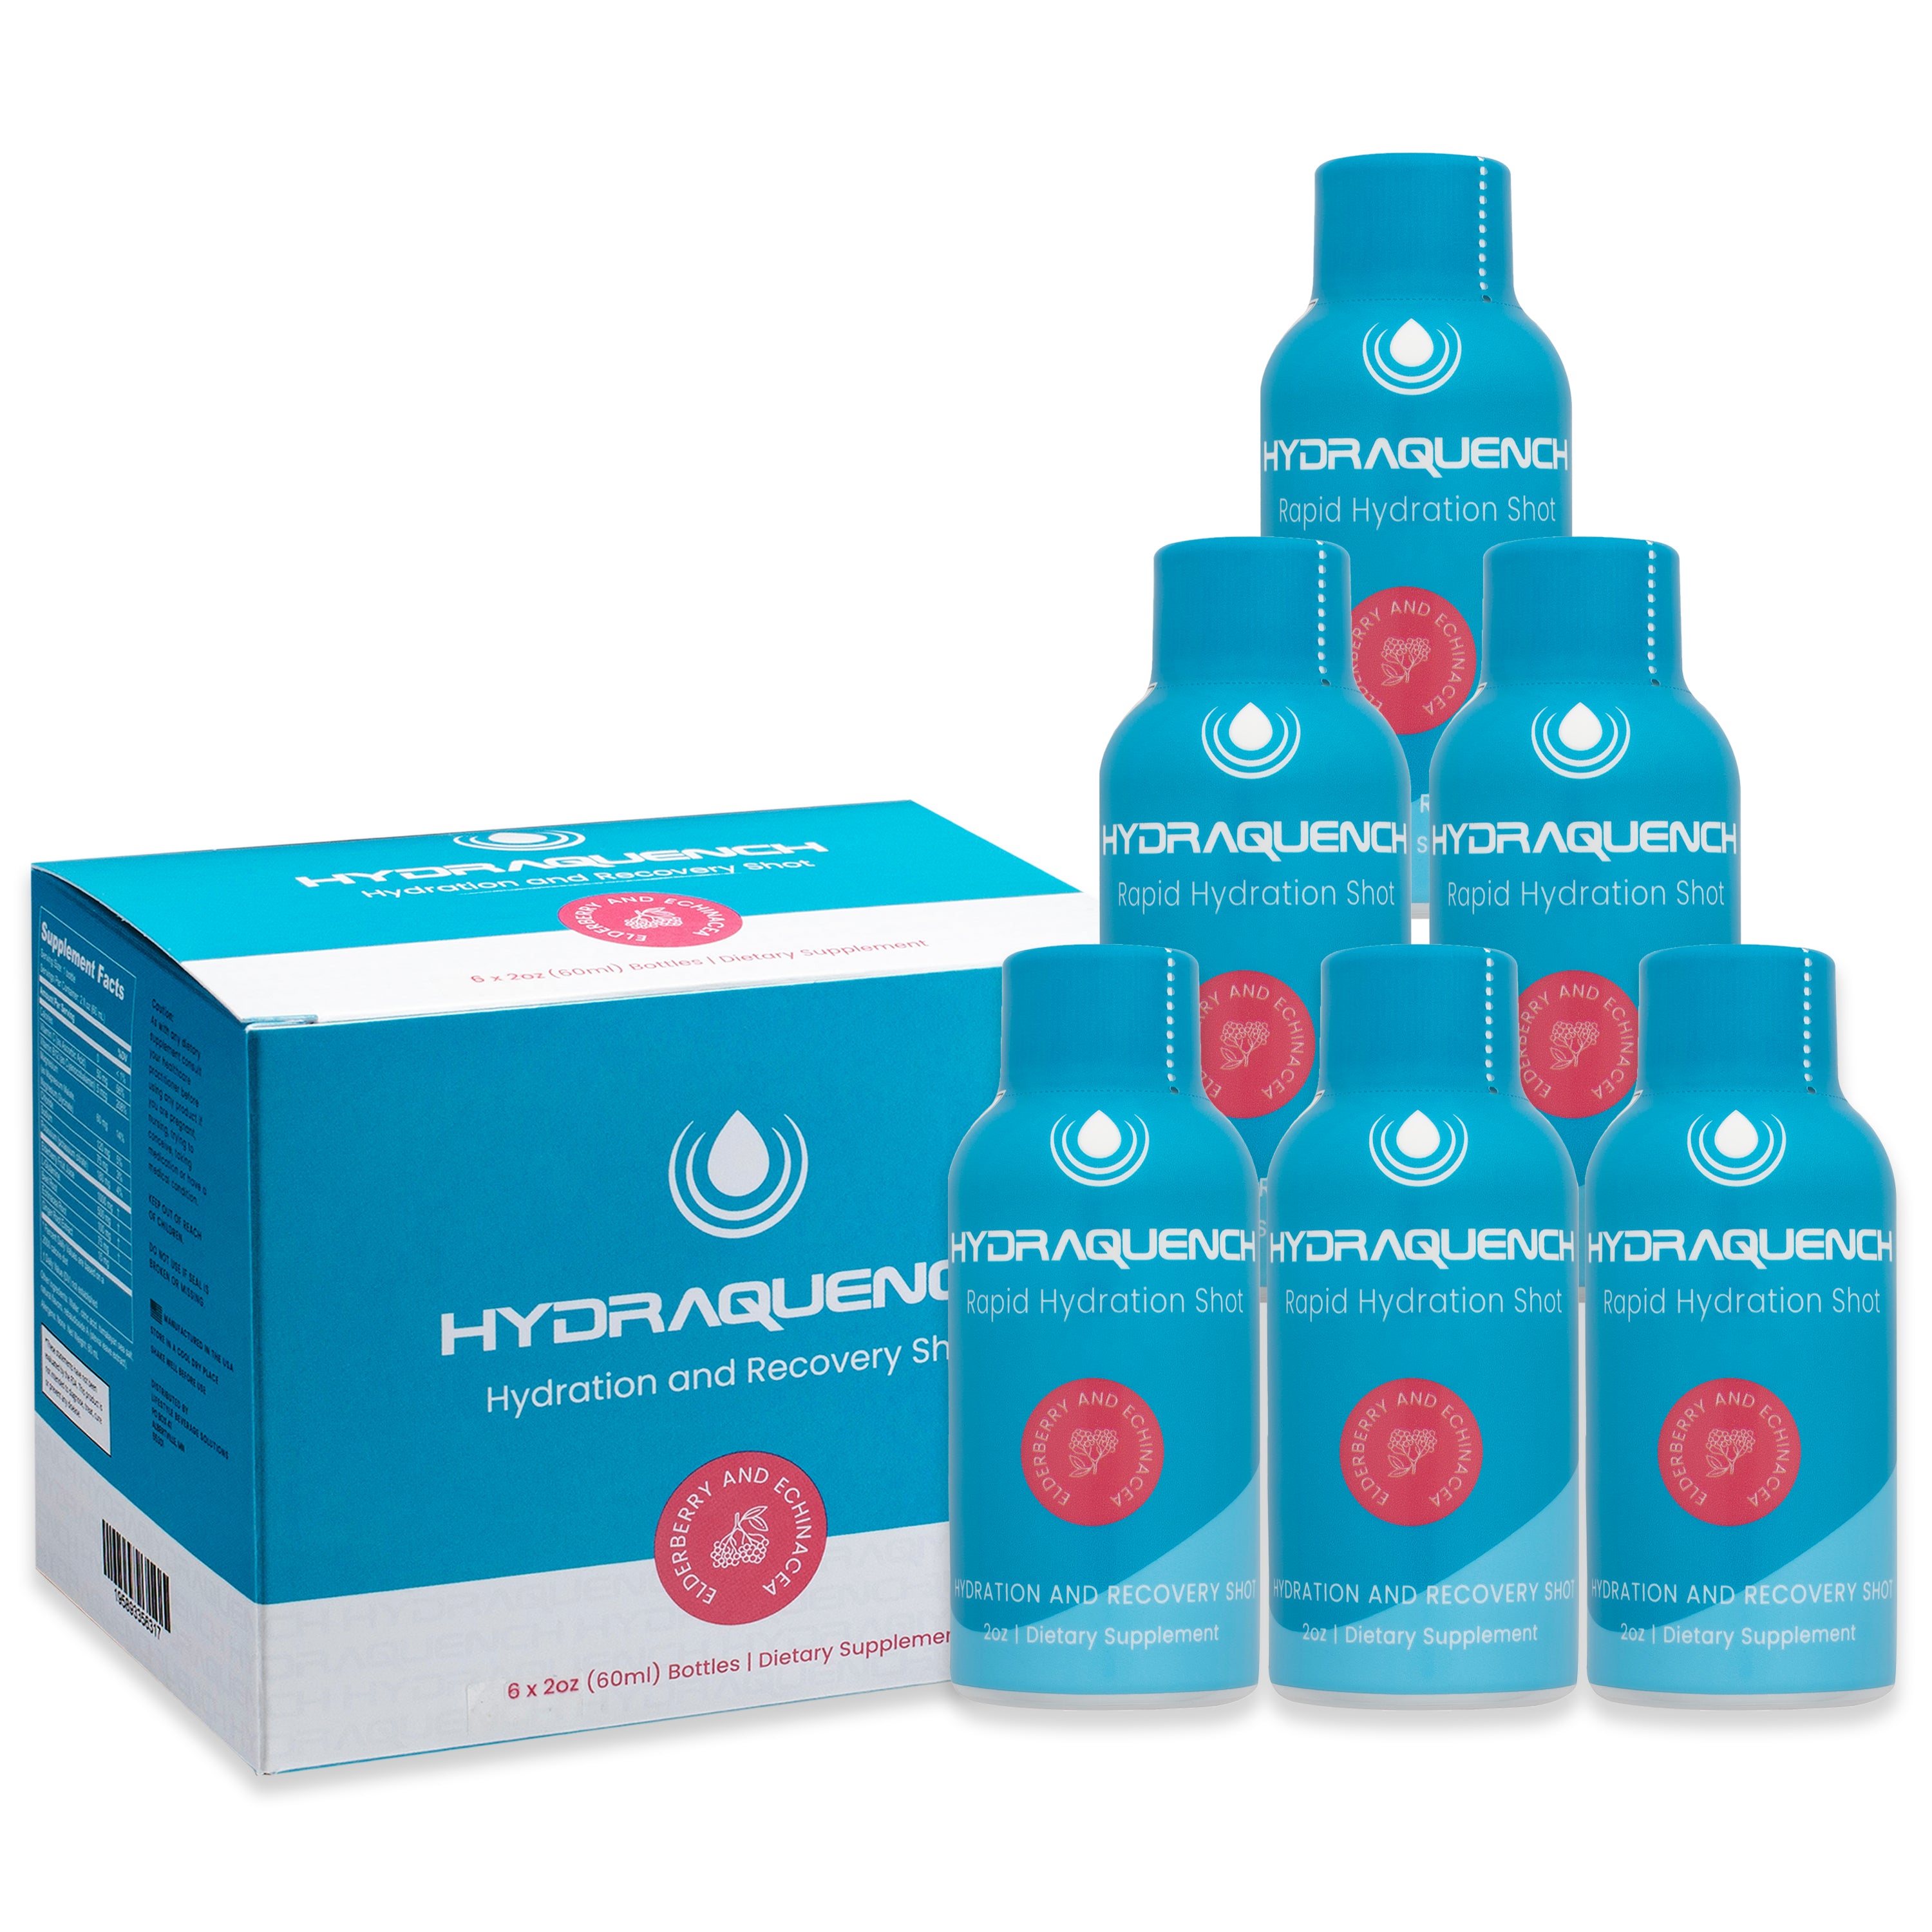 HYDRAQUENCH Hydration and Wellness Drink